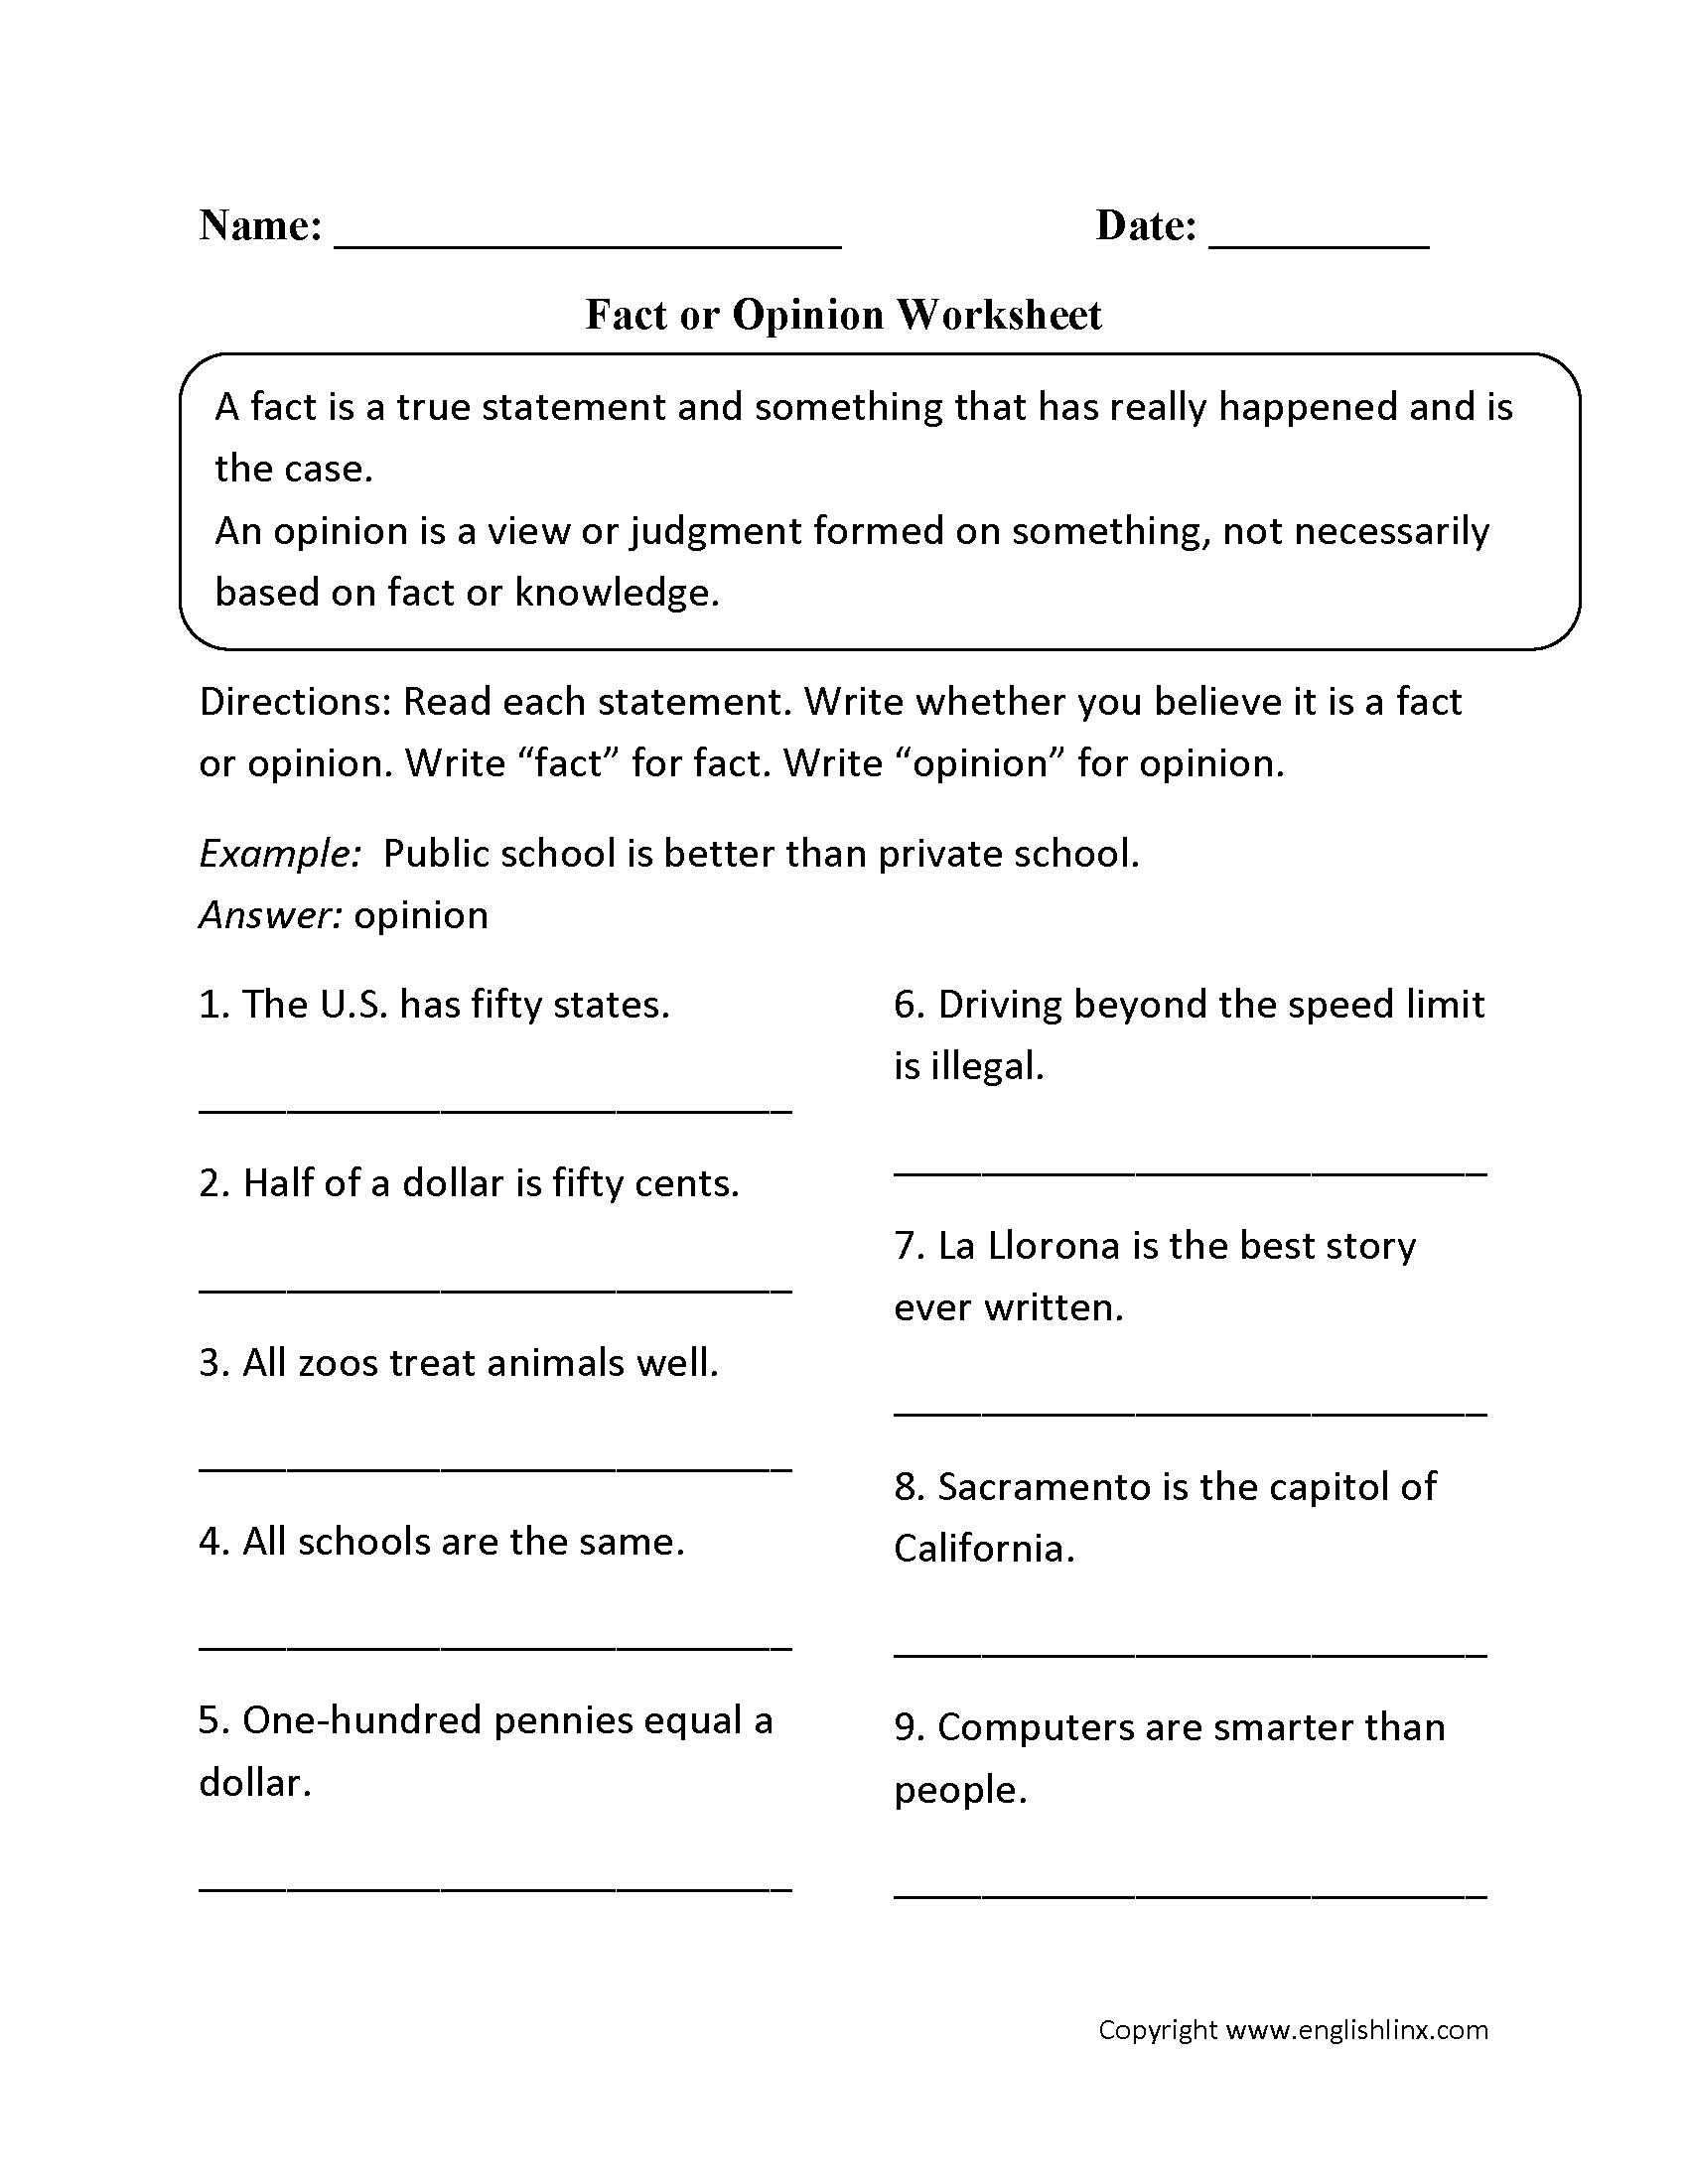 facts-vs-opinion-worksheet